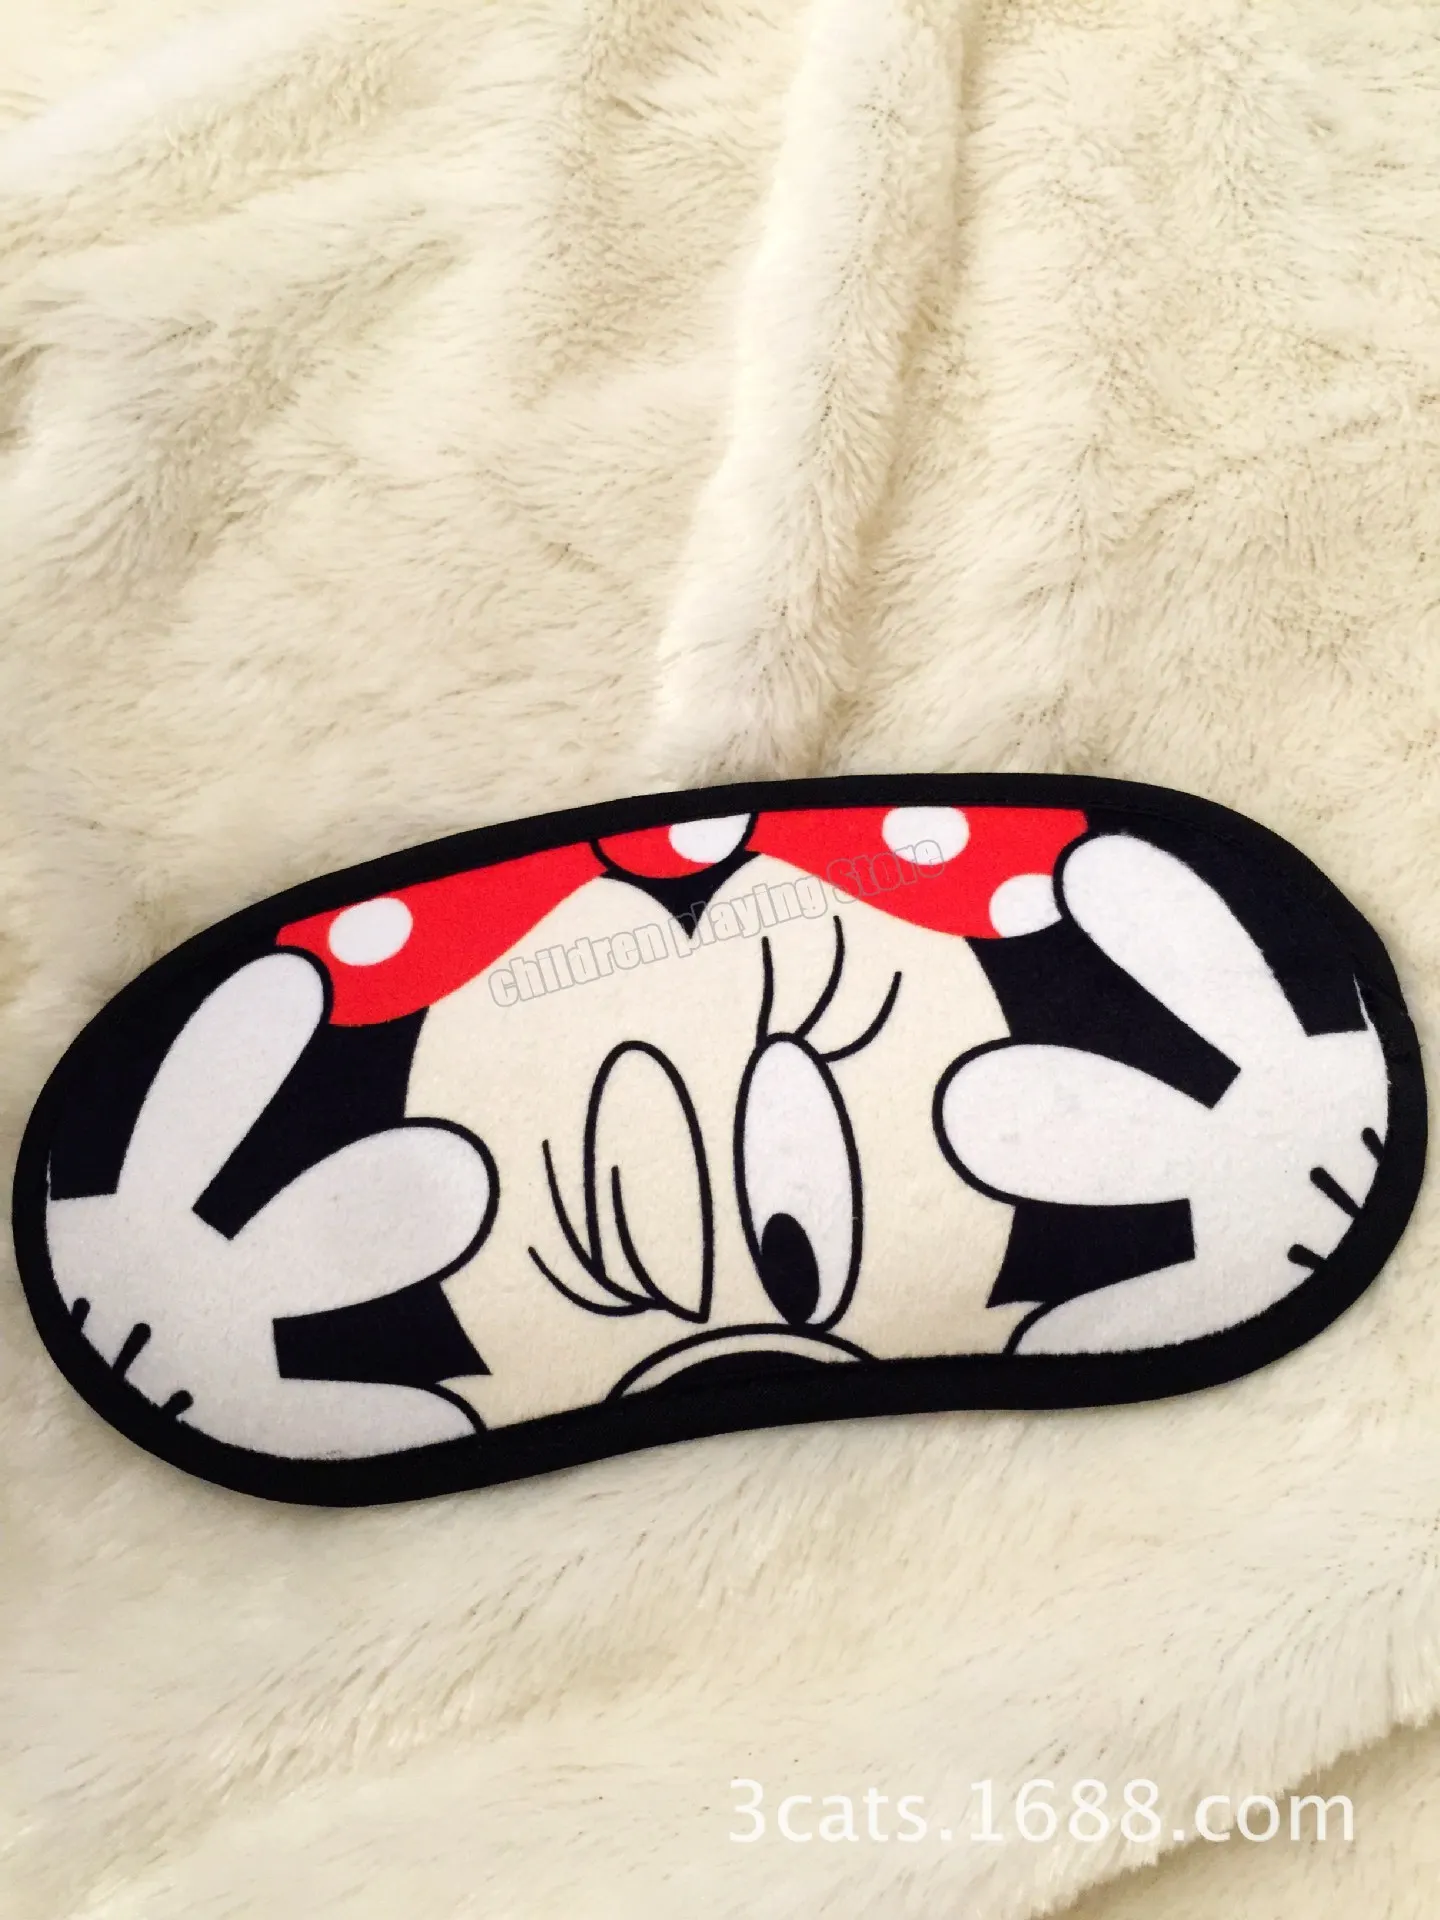 Mickey Mouse Eye Mask Travel Sleeping Blindfold Cover Shade y44 w2033 